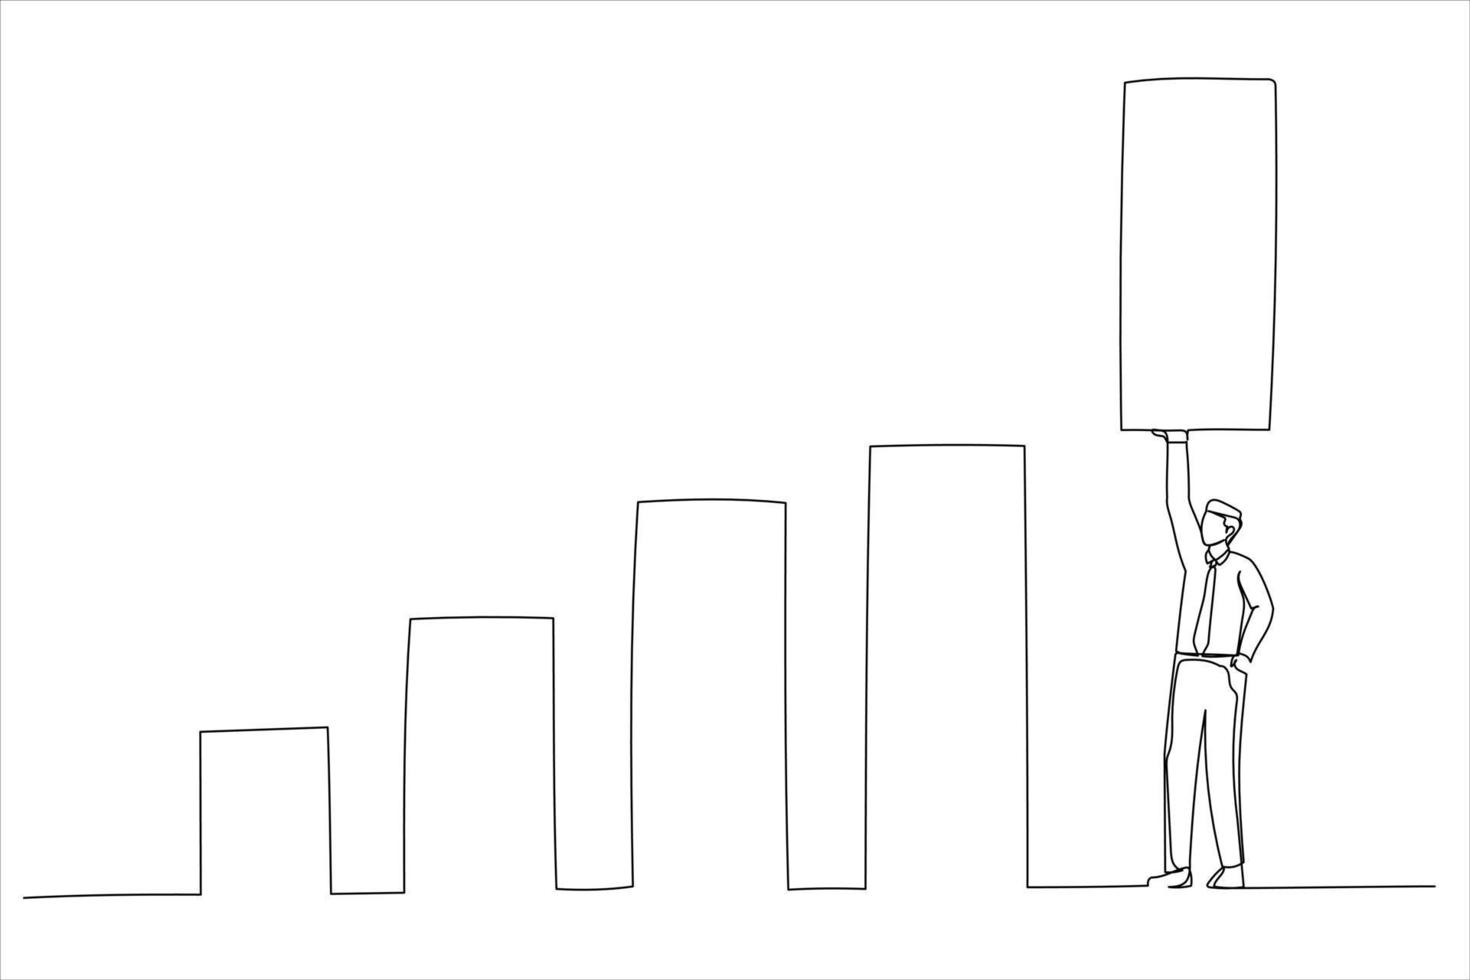 Drawing of confident businessman help lift up bar graph to new high level. Increase sales or revenue raising. Single line art style vector